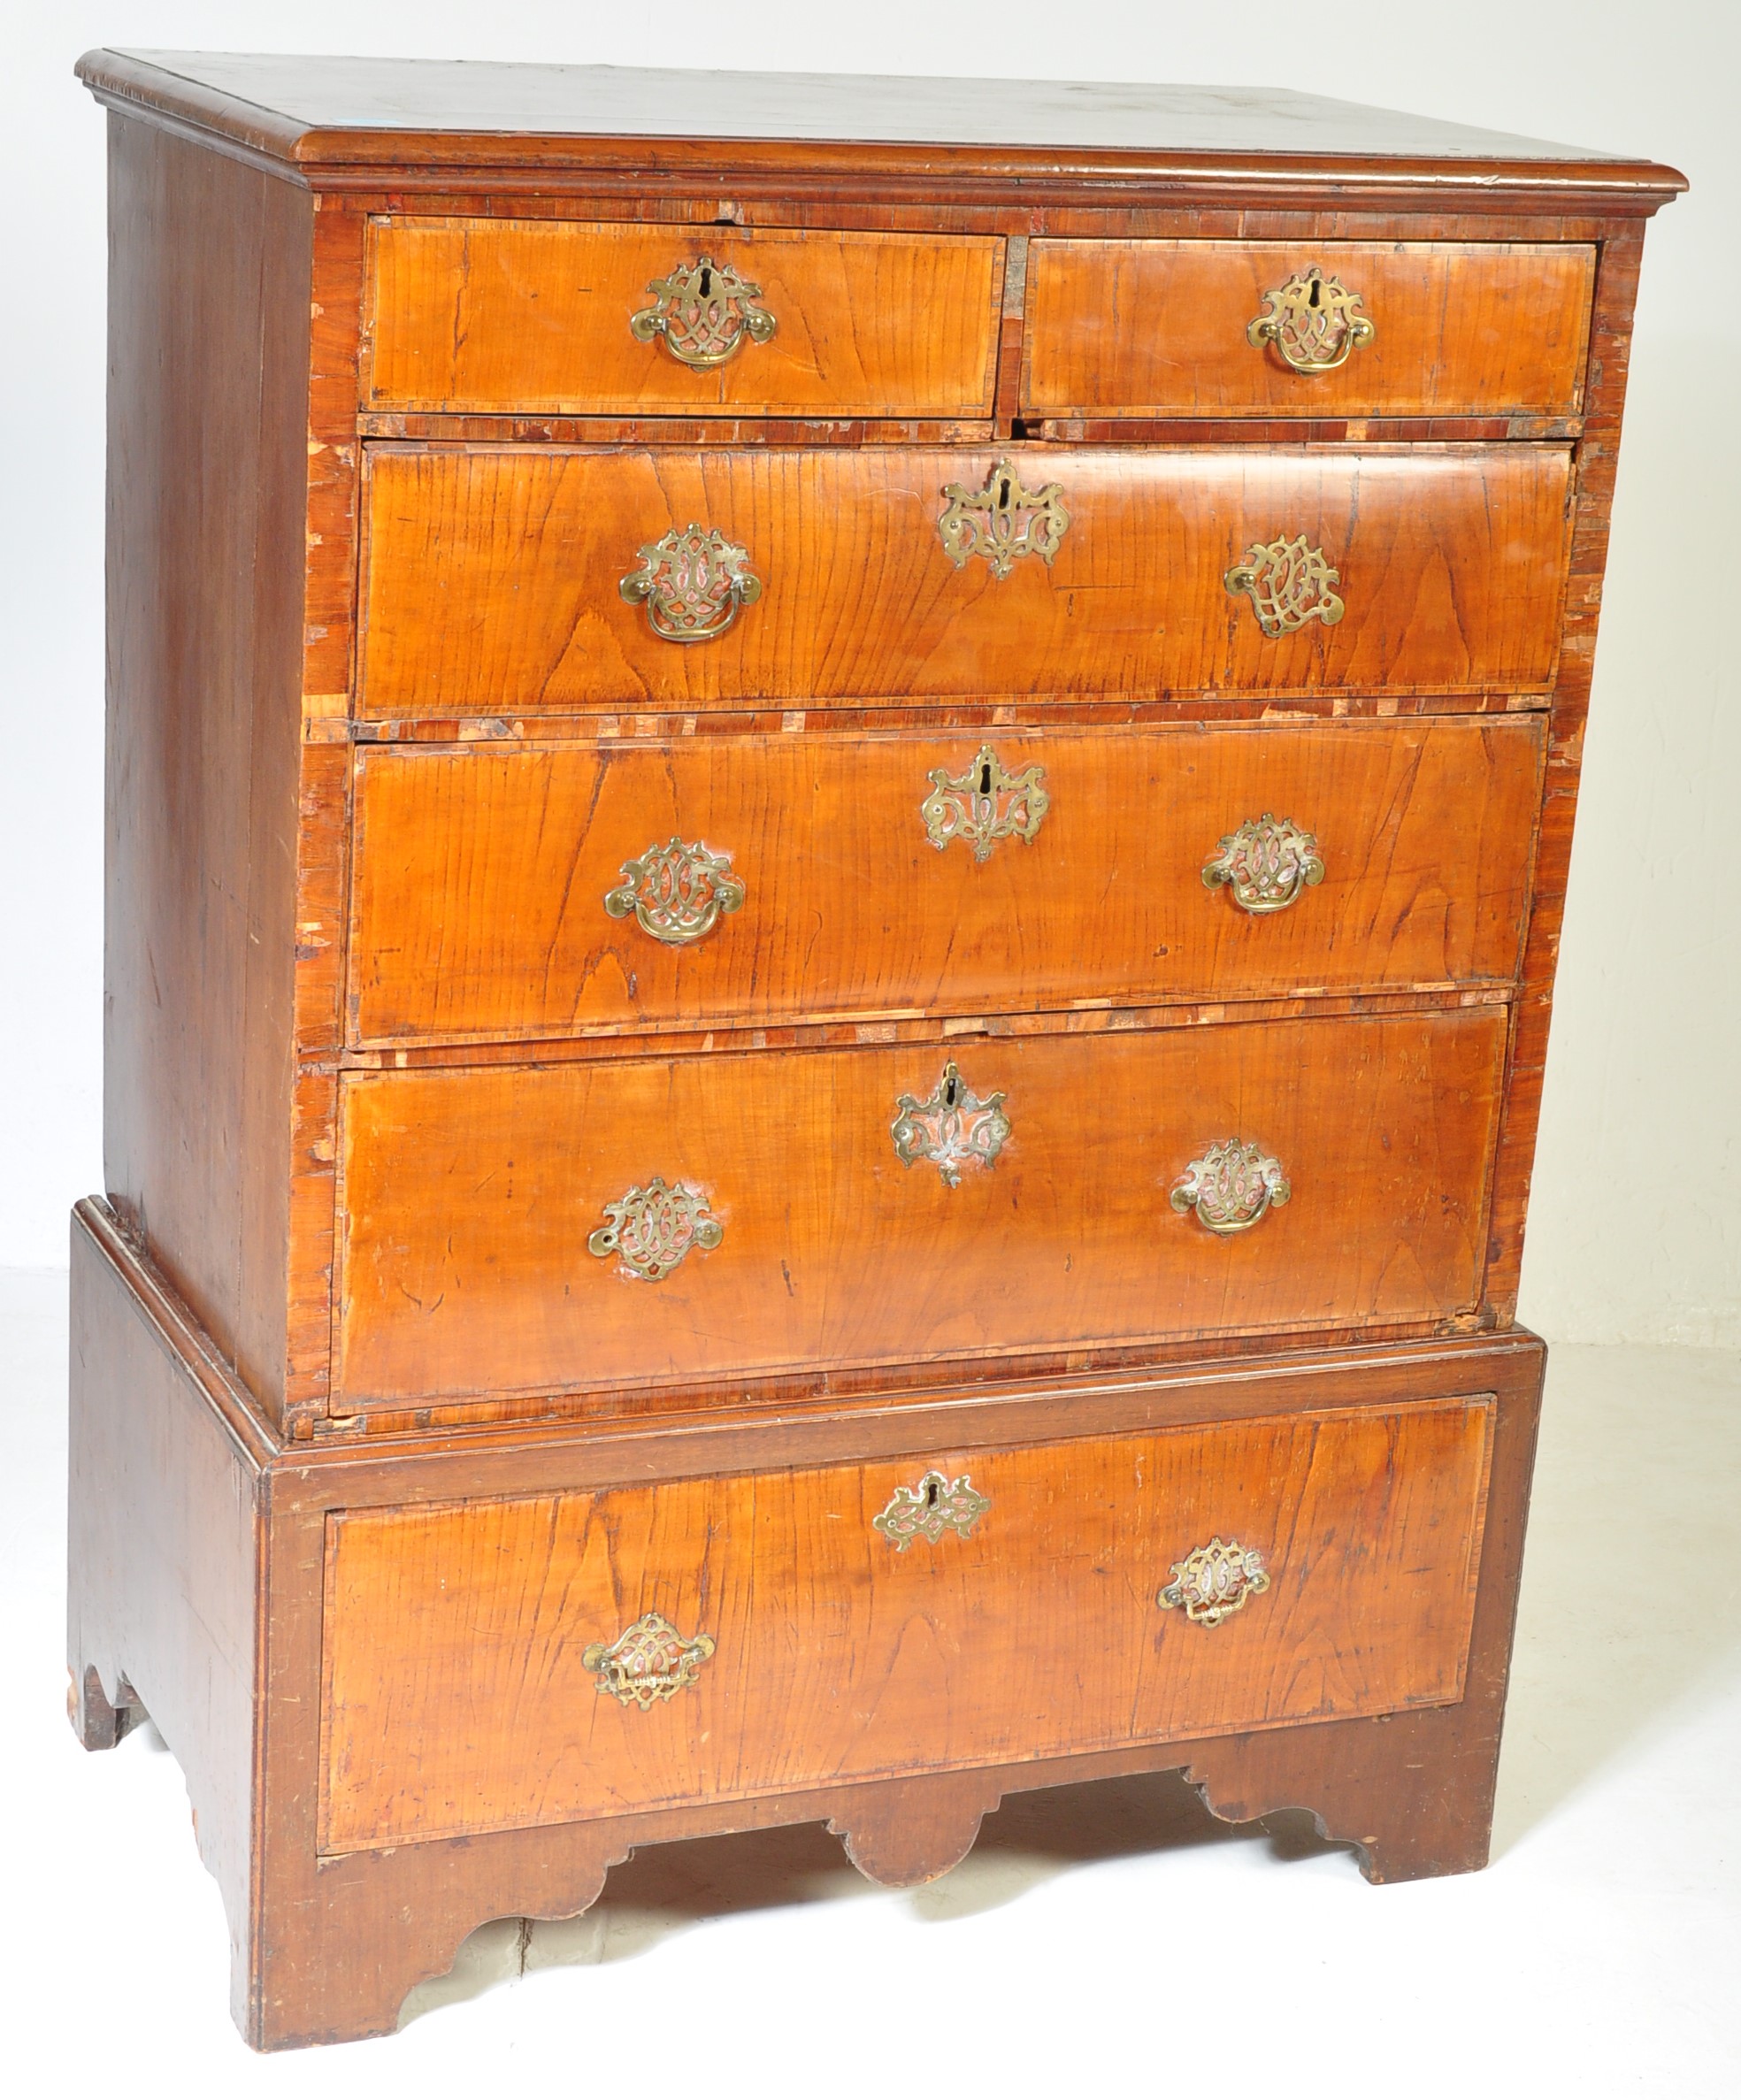 EARLY 18TH CENTURY QUEEN ANNE WALNUT CHEST OF DRAWERS - Image 2 of 8